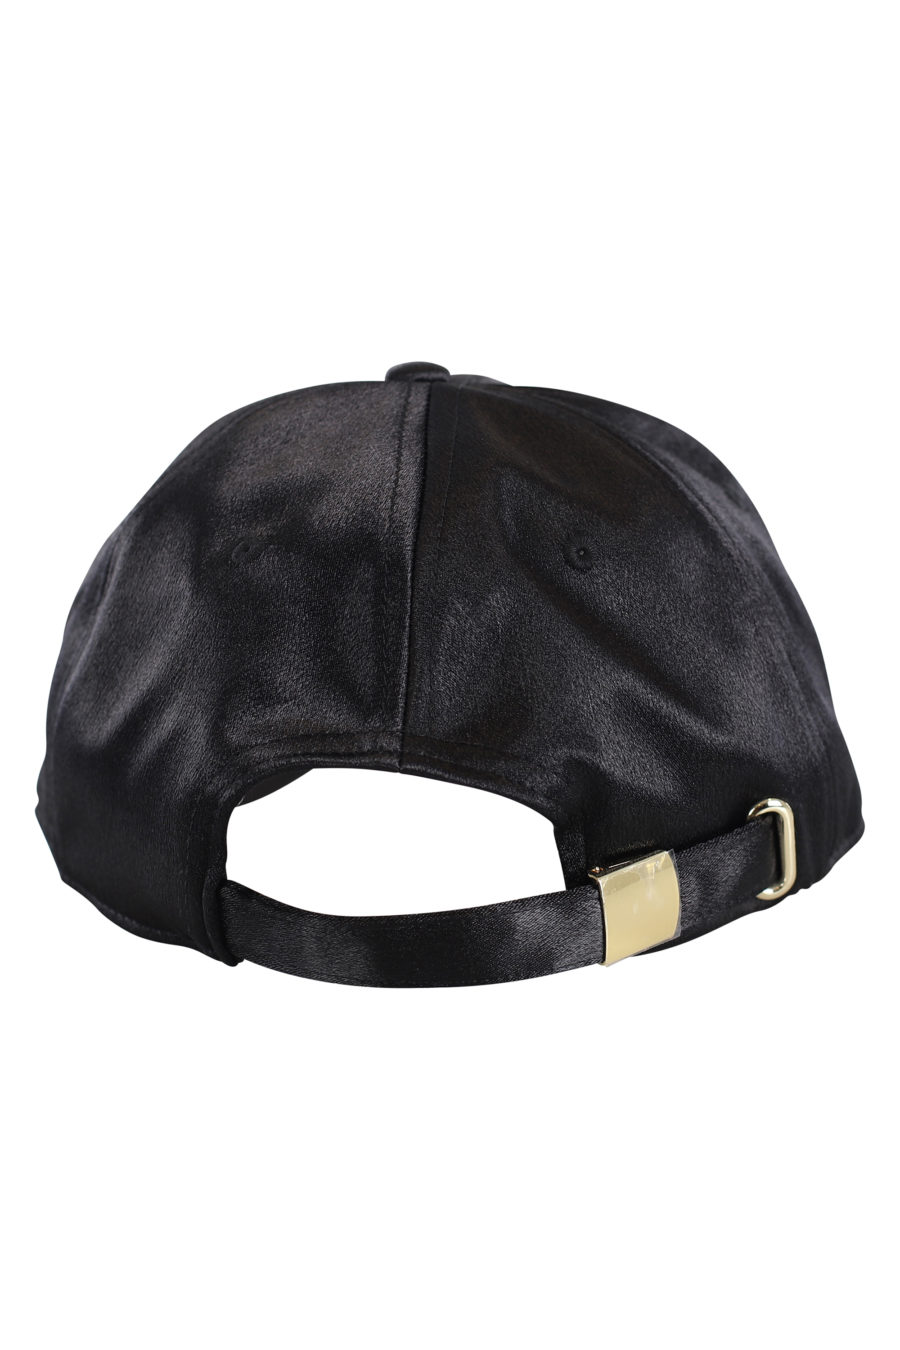 Black satin cap with black embroidered logo - IMG 0157